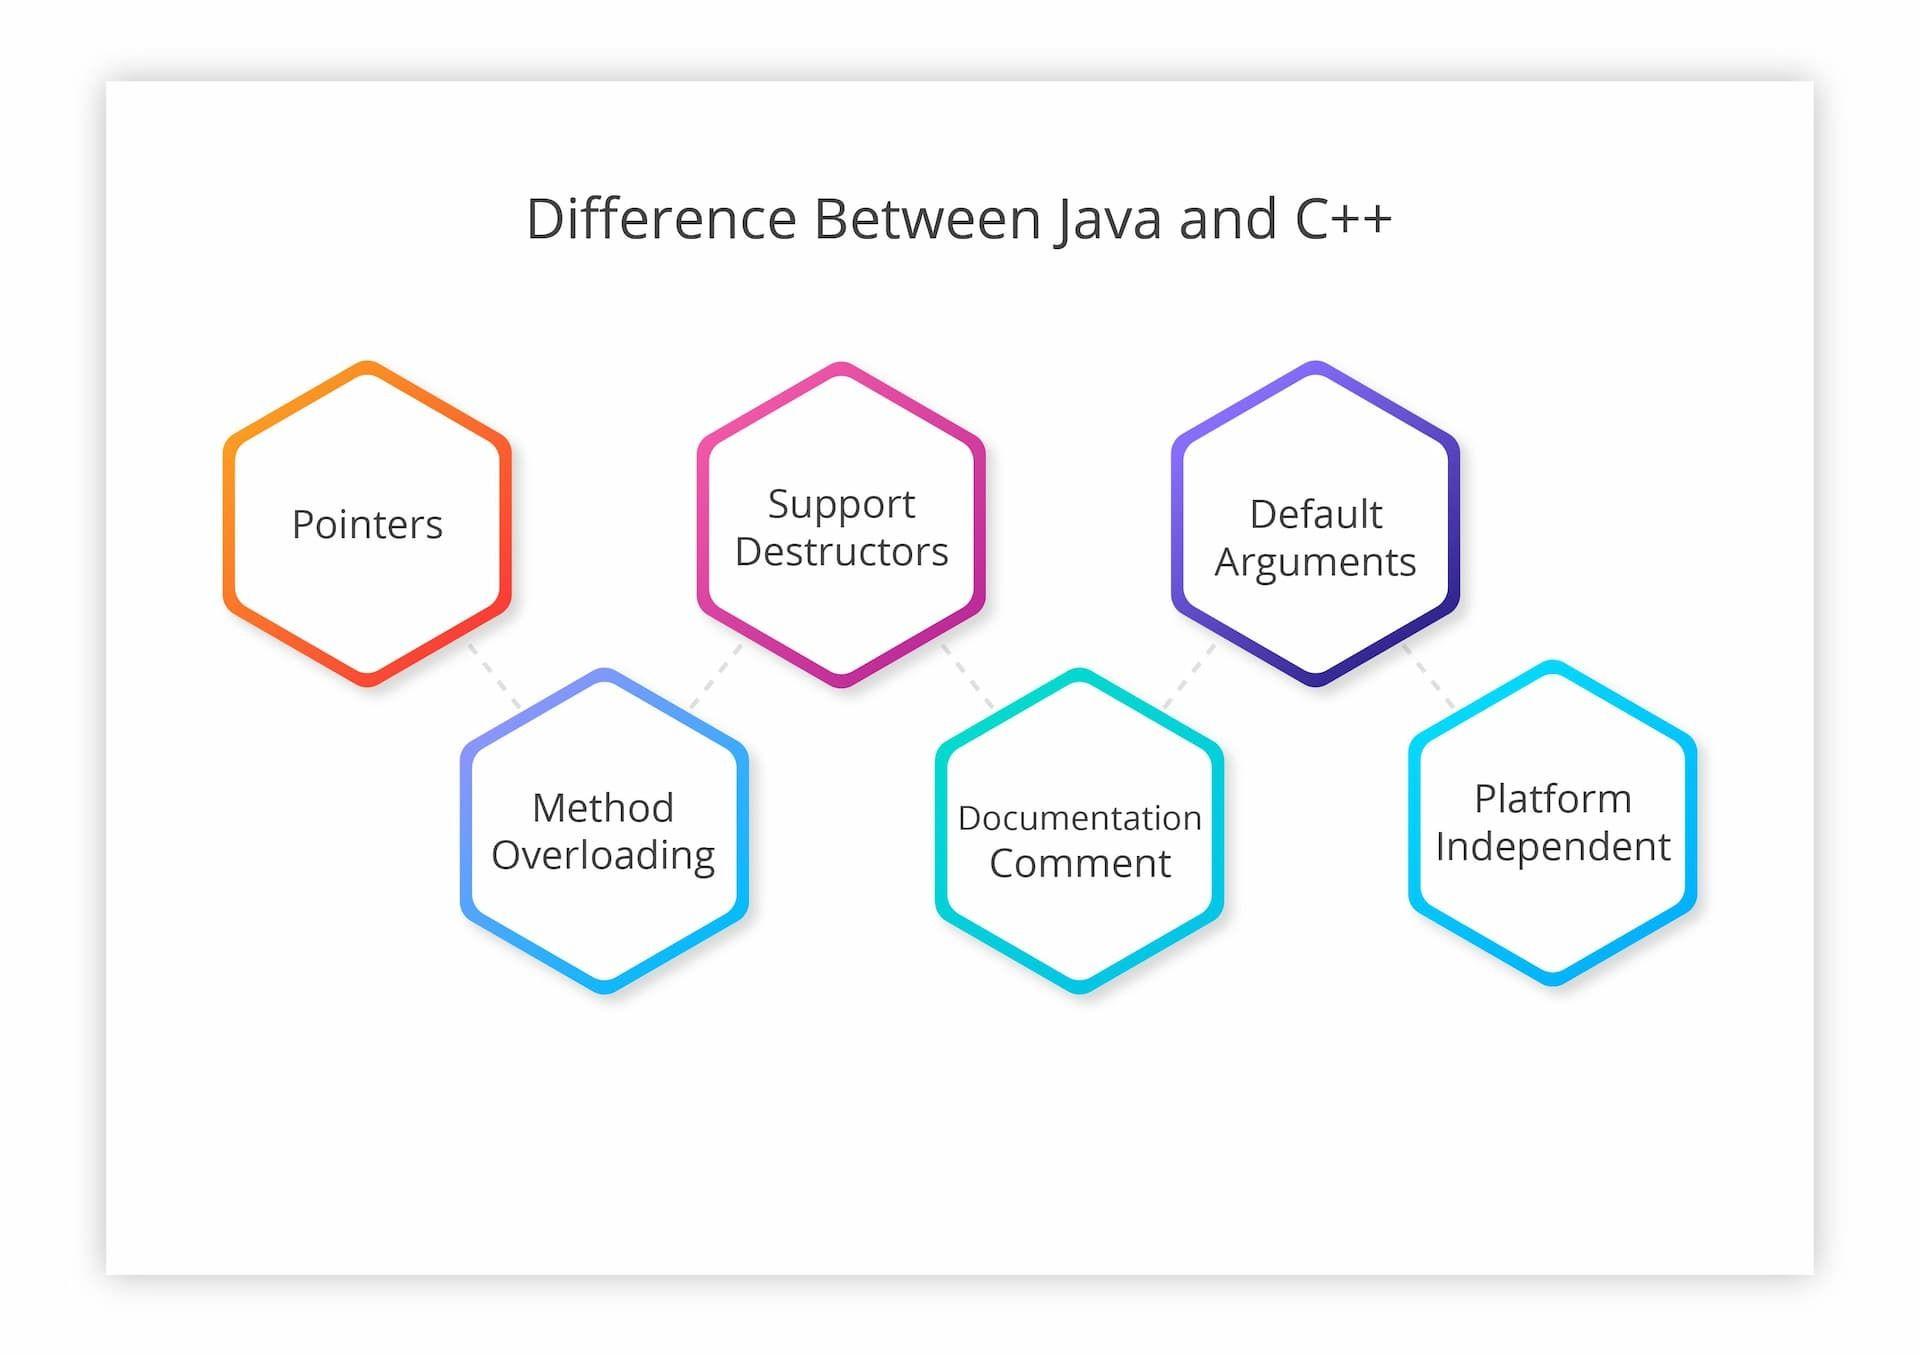 Differences Between C++ and Java